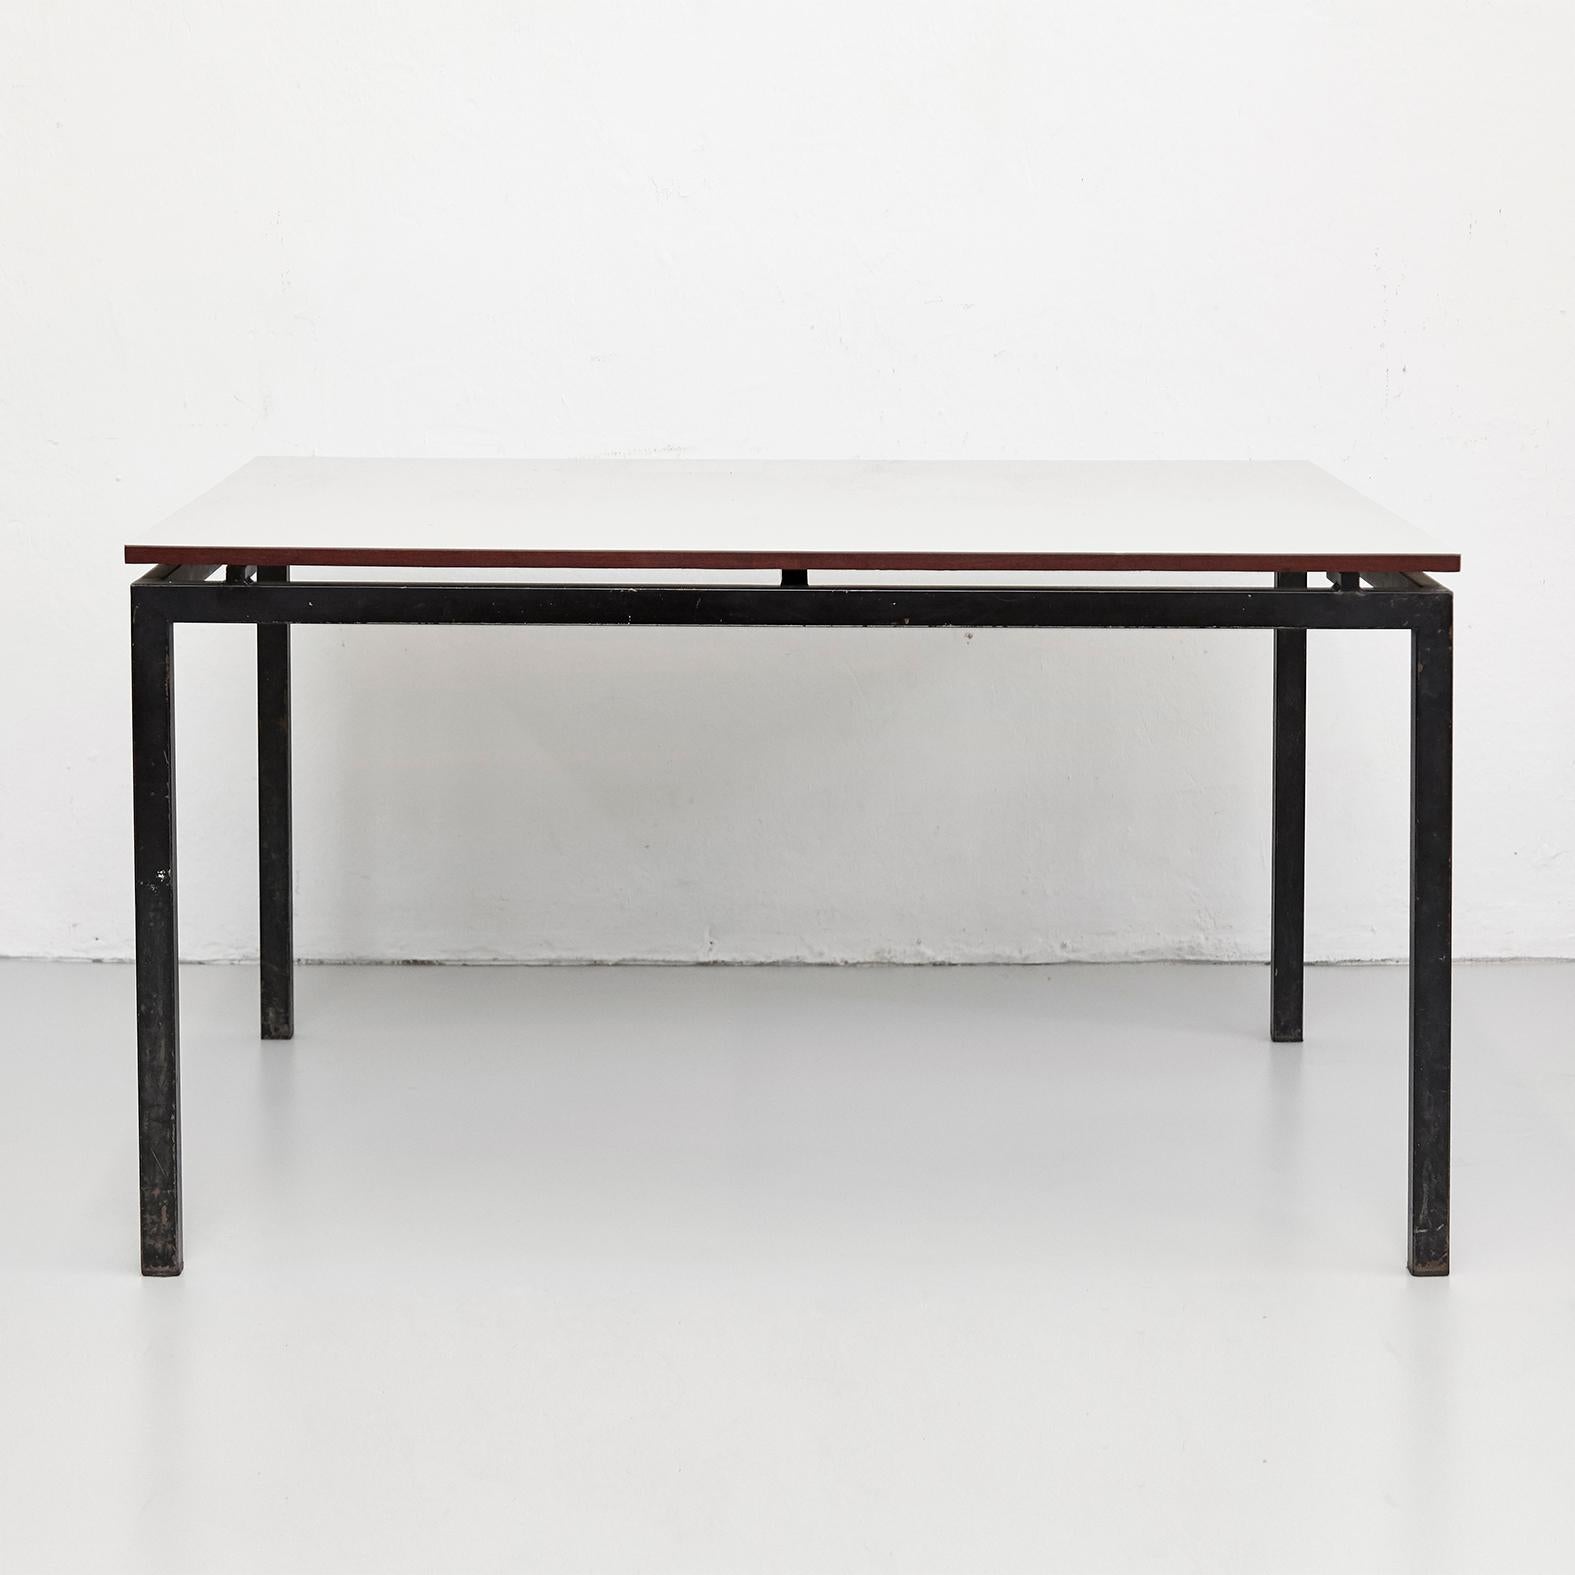 Table designed by Charlotte Perriand, circa 1950.

Wood with Formica, metal frame legs.

Provenance: Cansado, Mauritania (Africa).

In good original condition, with minor wear consistent with age and use, preserving a beautiful patina.